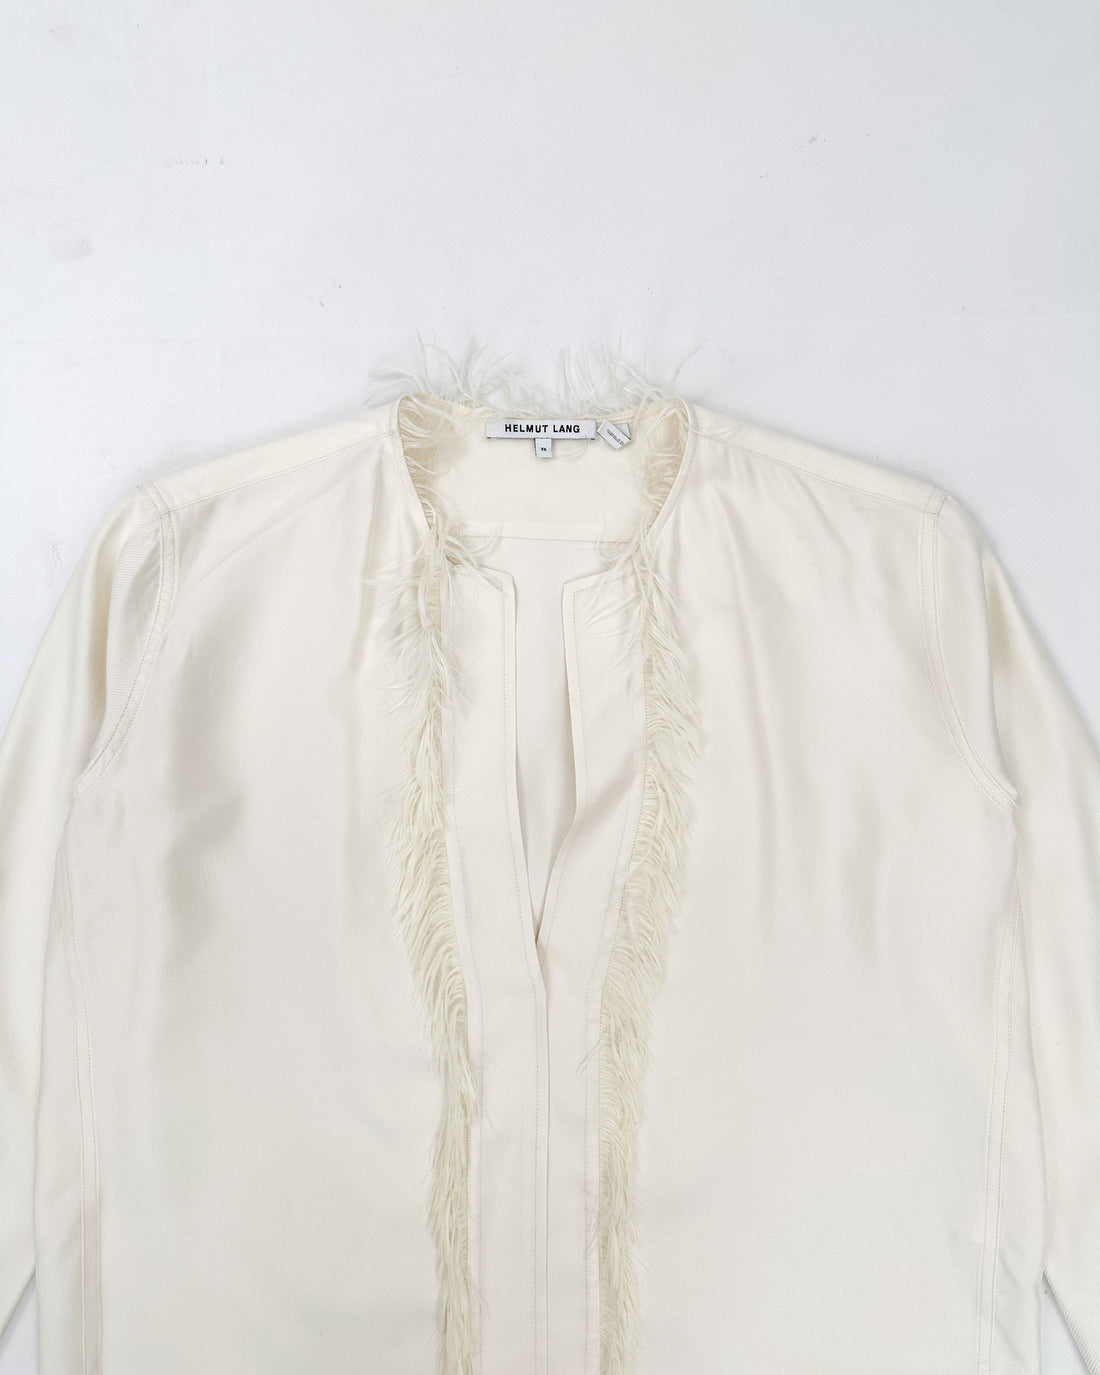 Helmut Lang White Feathered Shirt 2000's